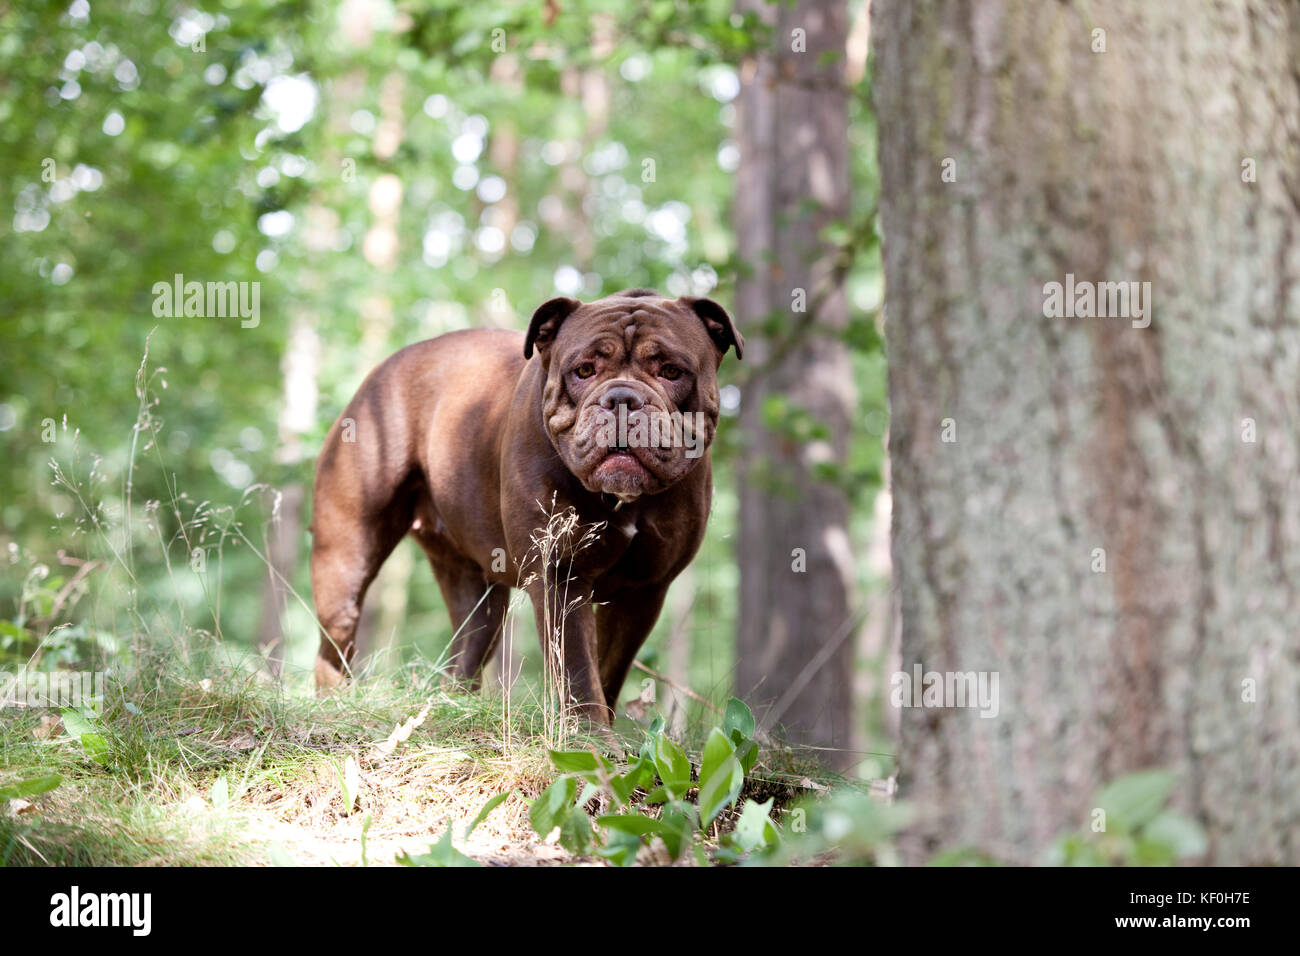 Olde English bulldogge standing in forest Banque D'Images